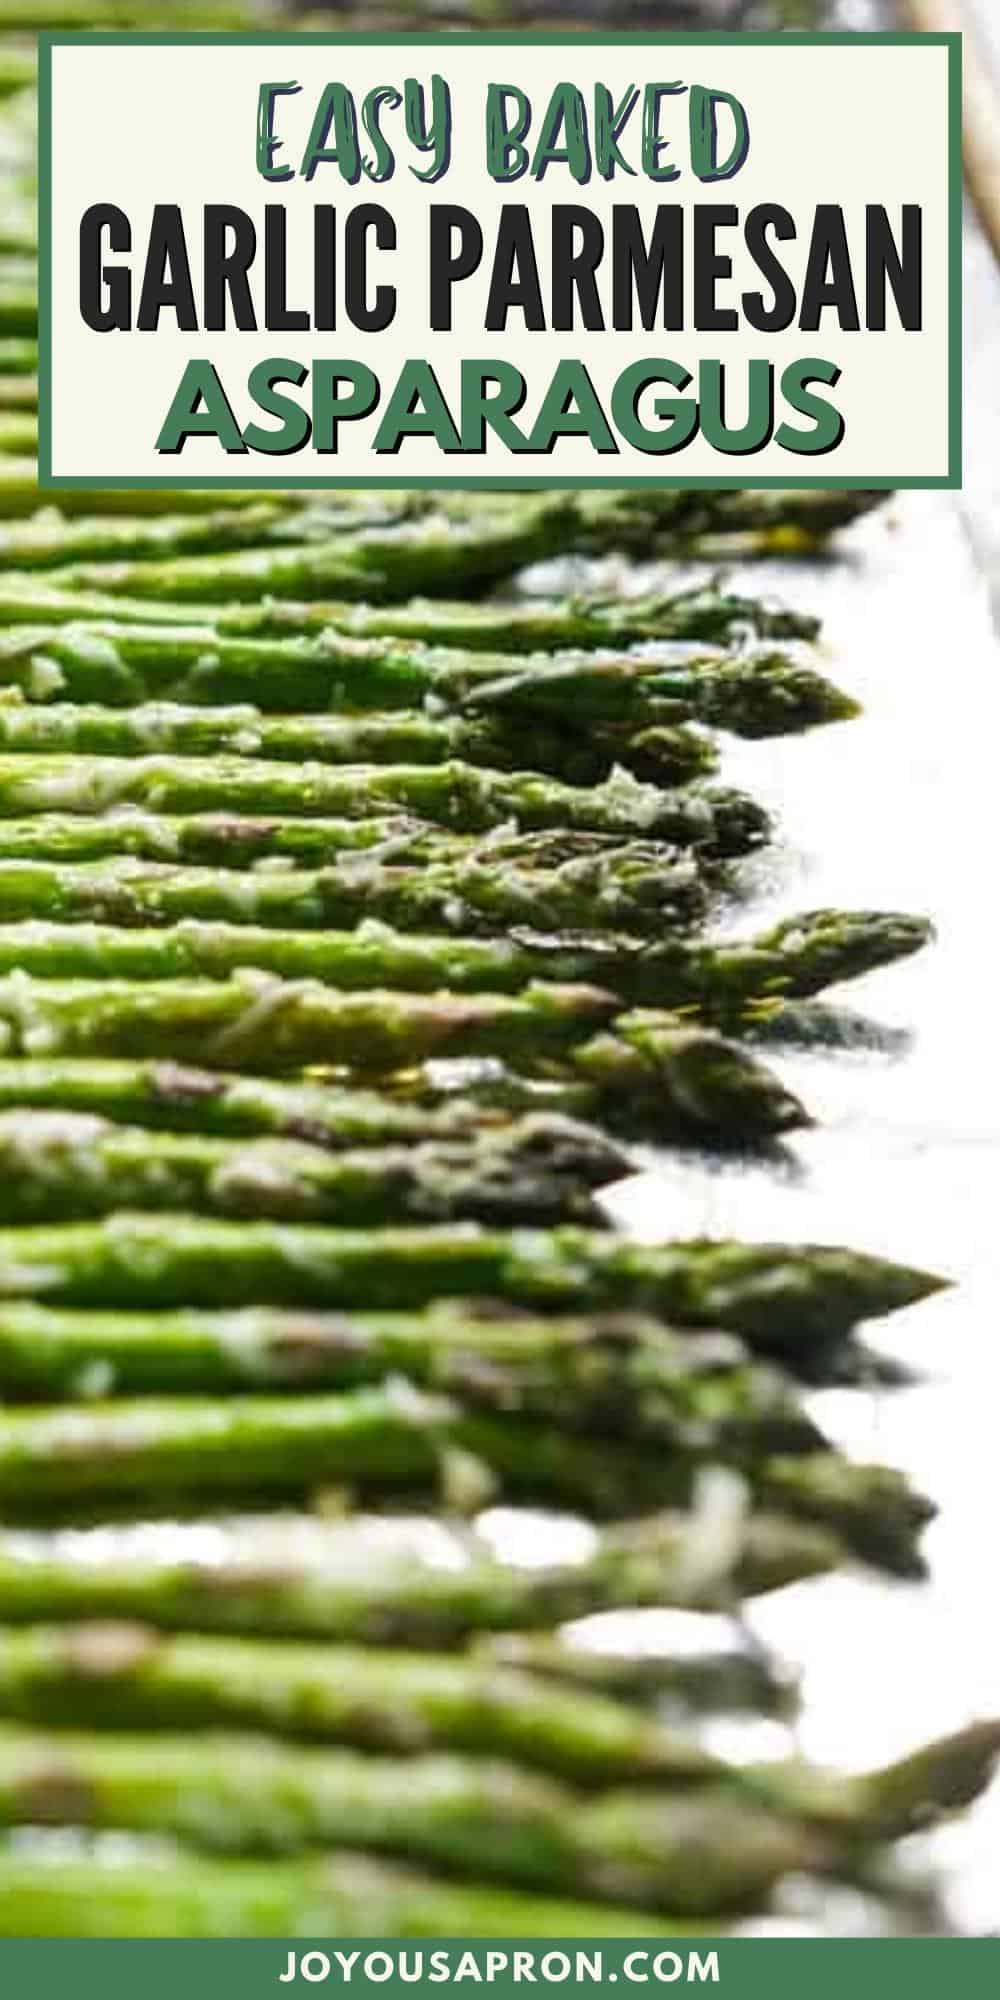 Garlic Parmesan Asparagus - easy, light, healthy and delicious vegetable side dish! Perfect for the Thanksgiving and Christmas holidays or dinner any day! Takes only 15 minutes to make! This asparagus side is filled with great flavors and textures. via @joyousapron